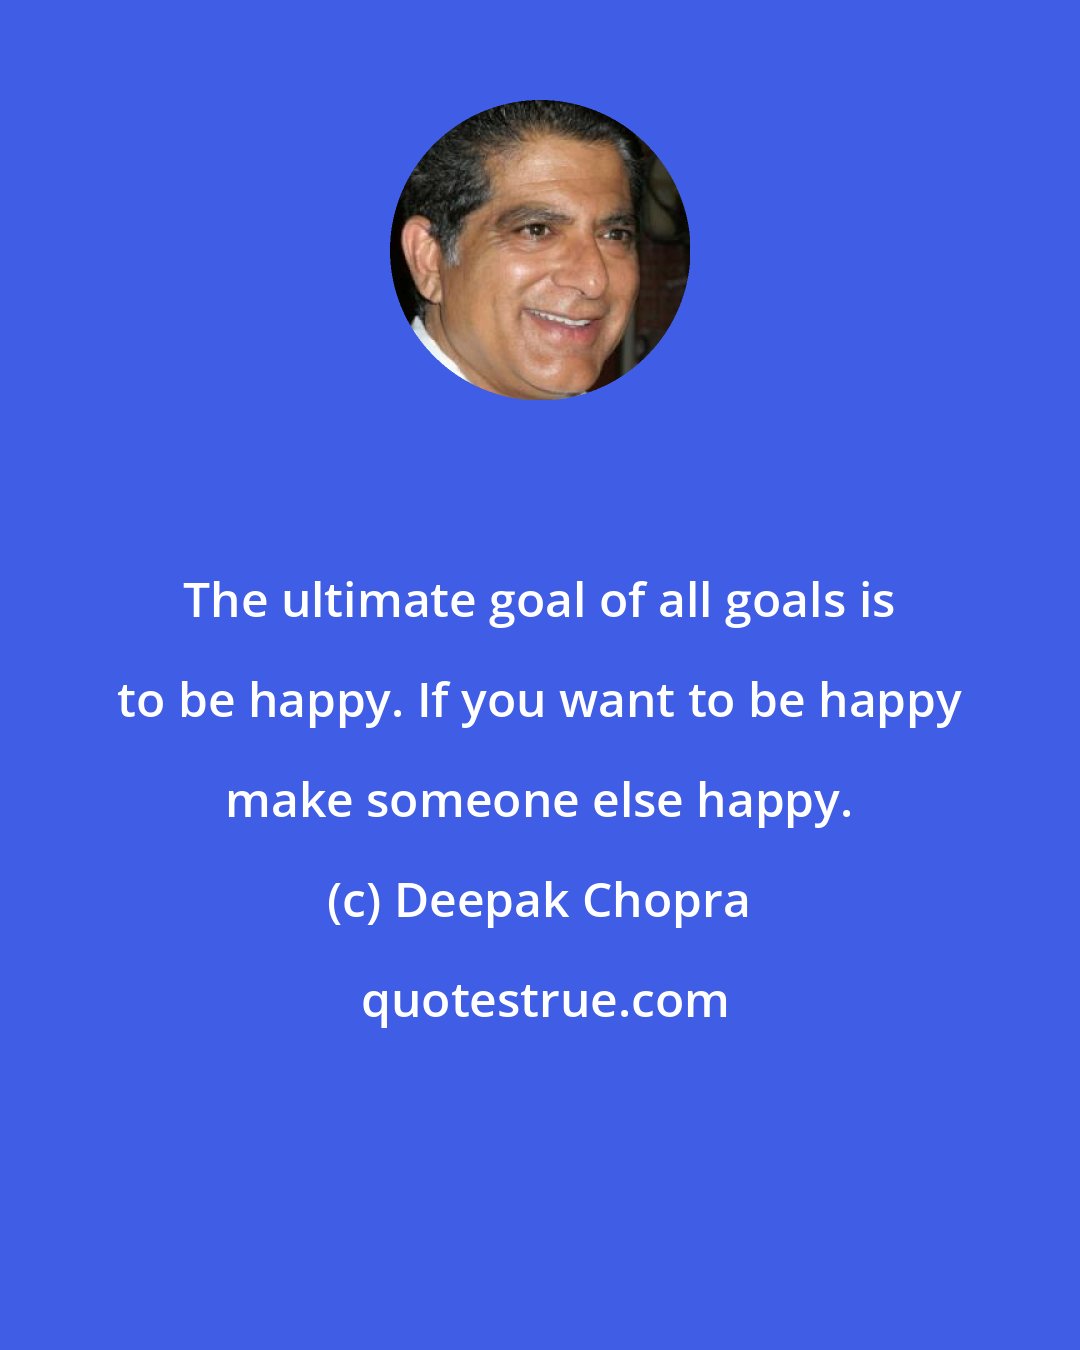 Deepak Chopra: The ultimate goal of all goals is to be happy. If you want to be happy make someone else happy.